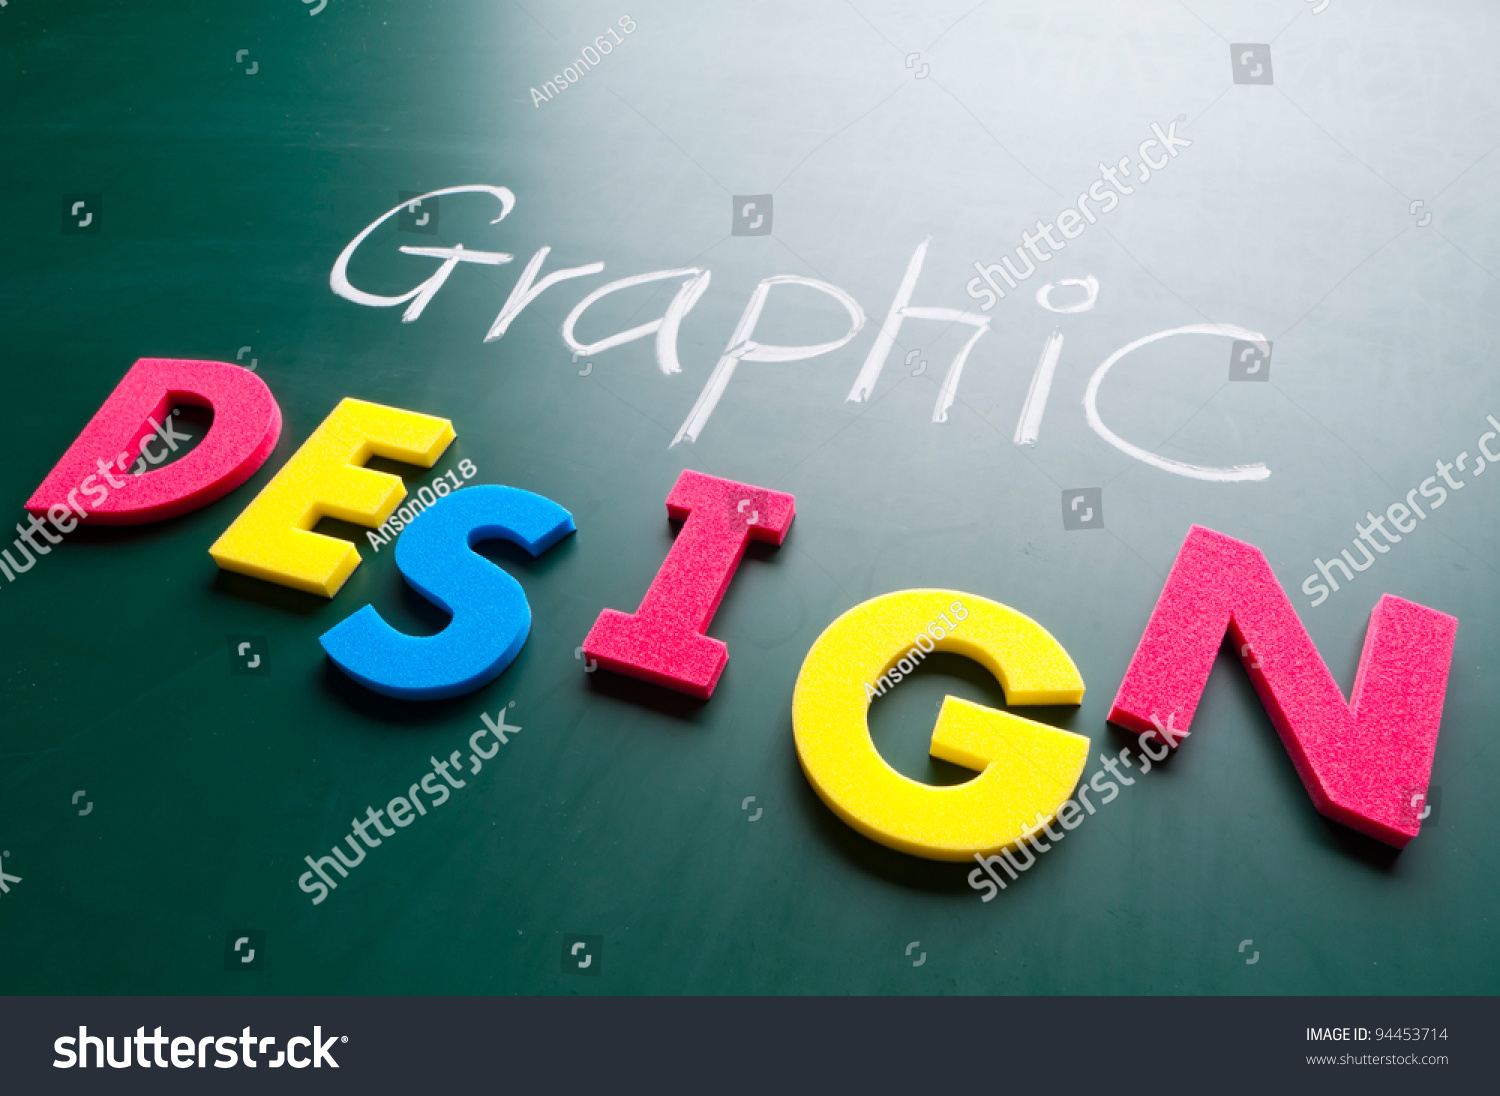 Graphic design concept, colorful words on blackboard. #94453714